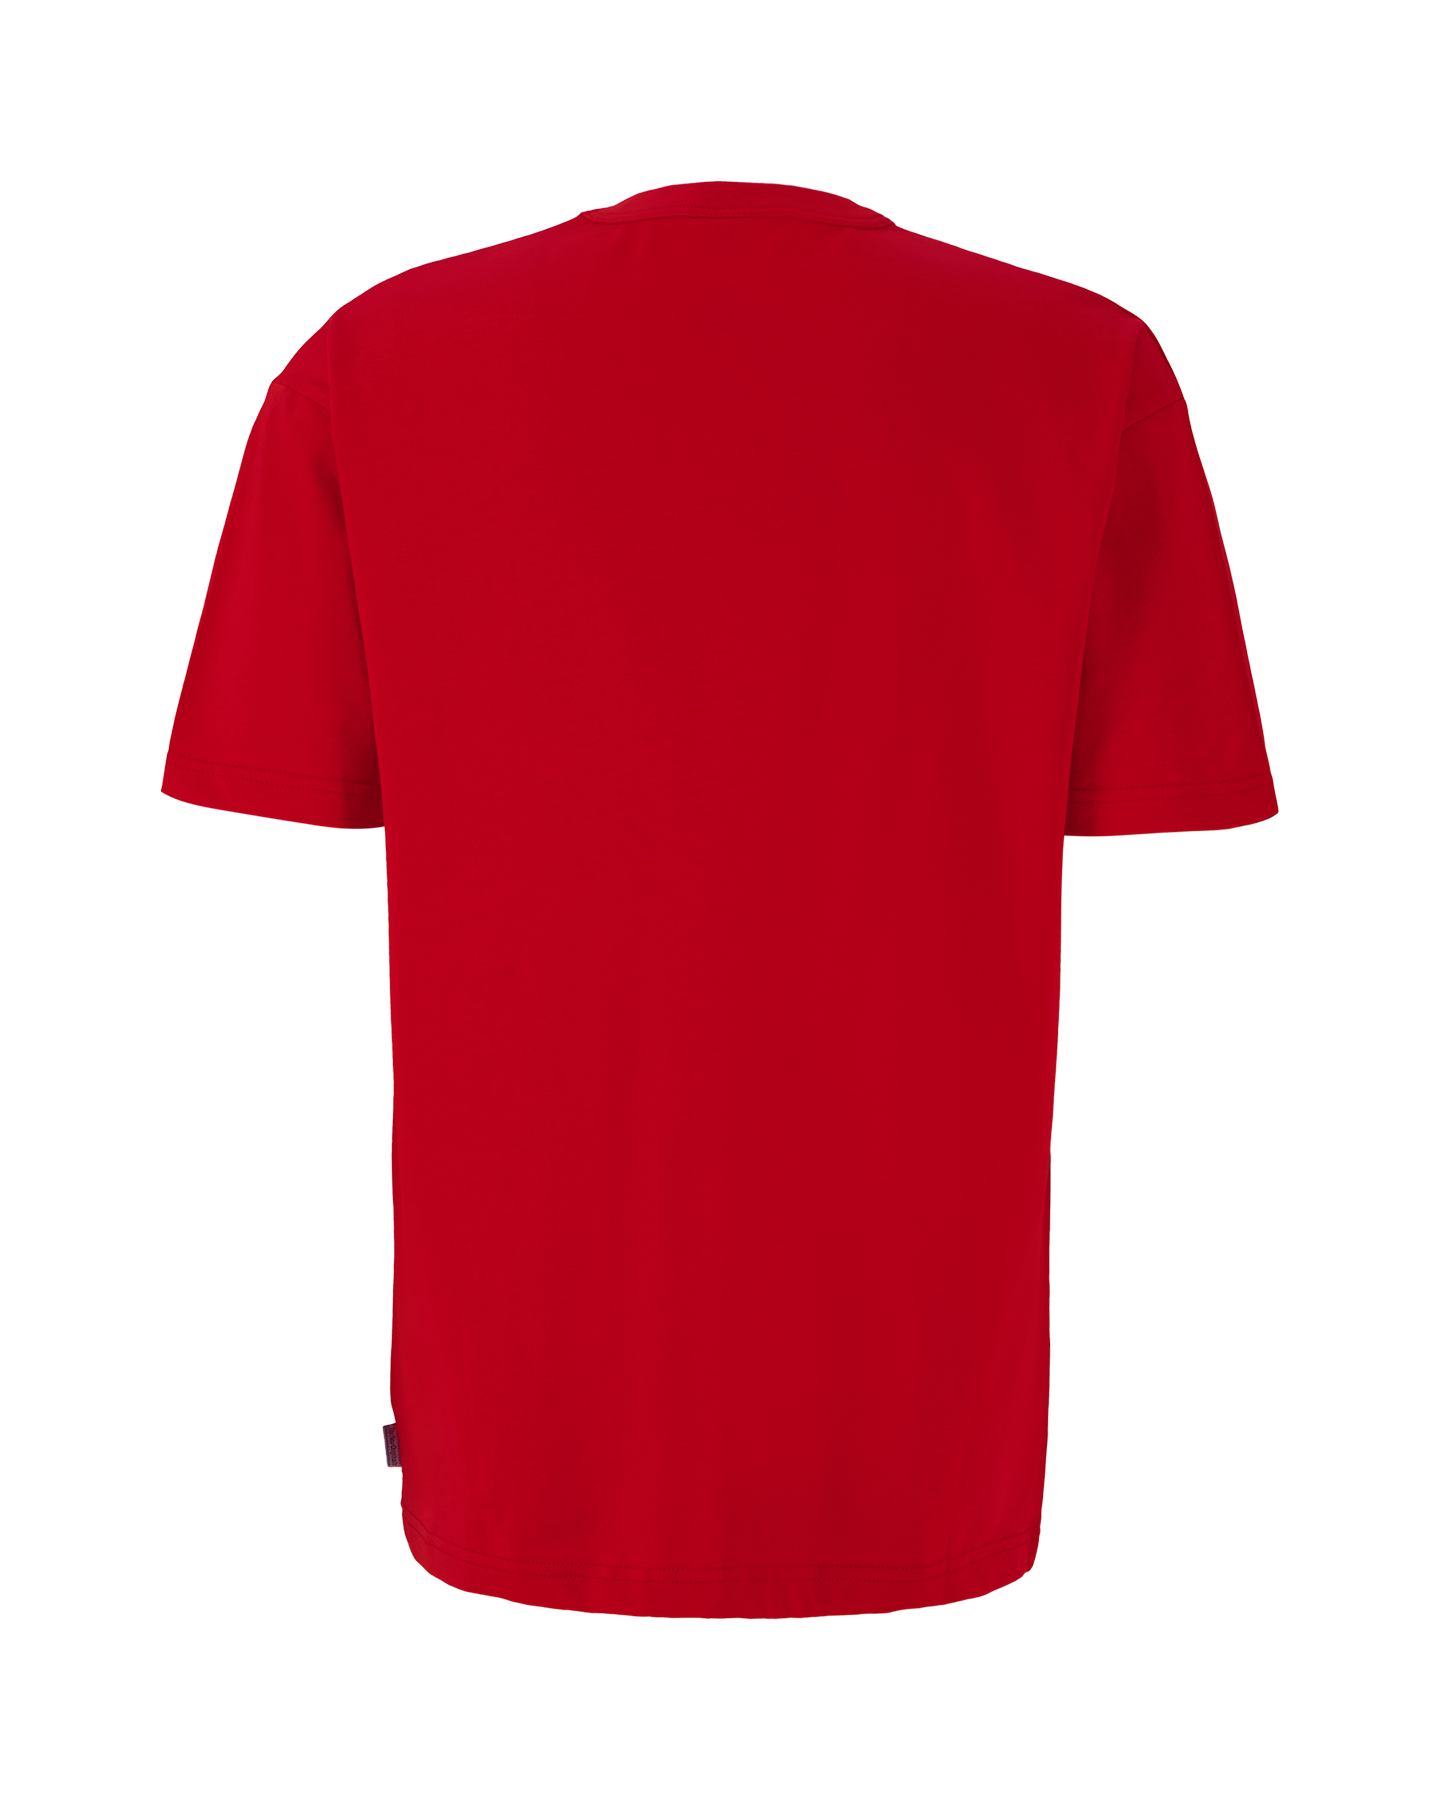 The New Originals Workman Embroidered Tee ROOD 2